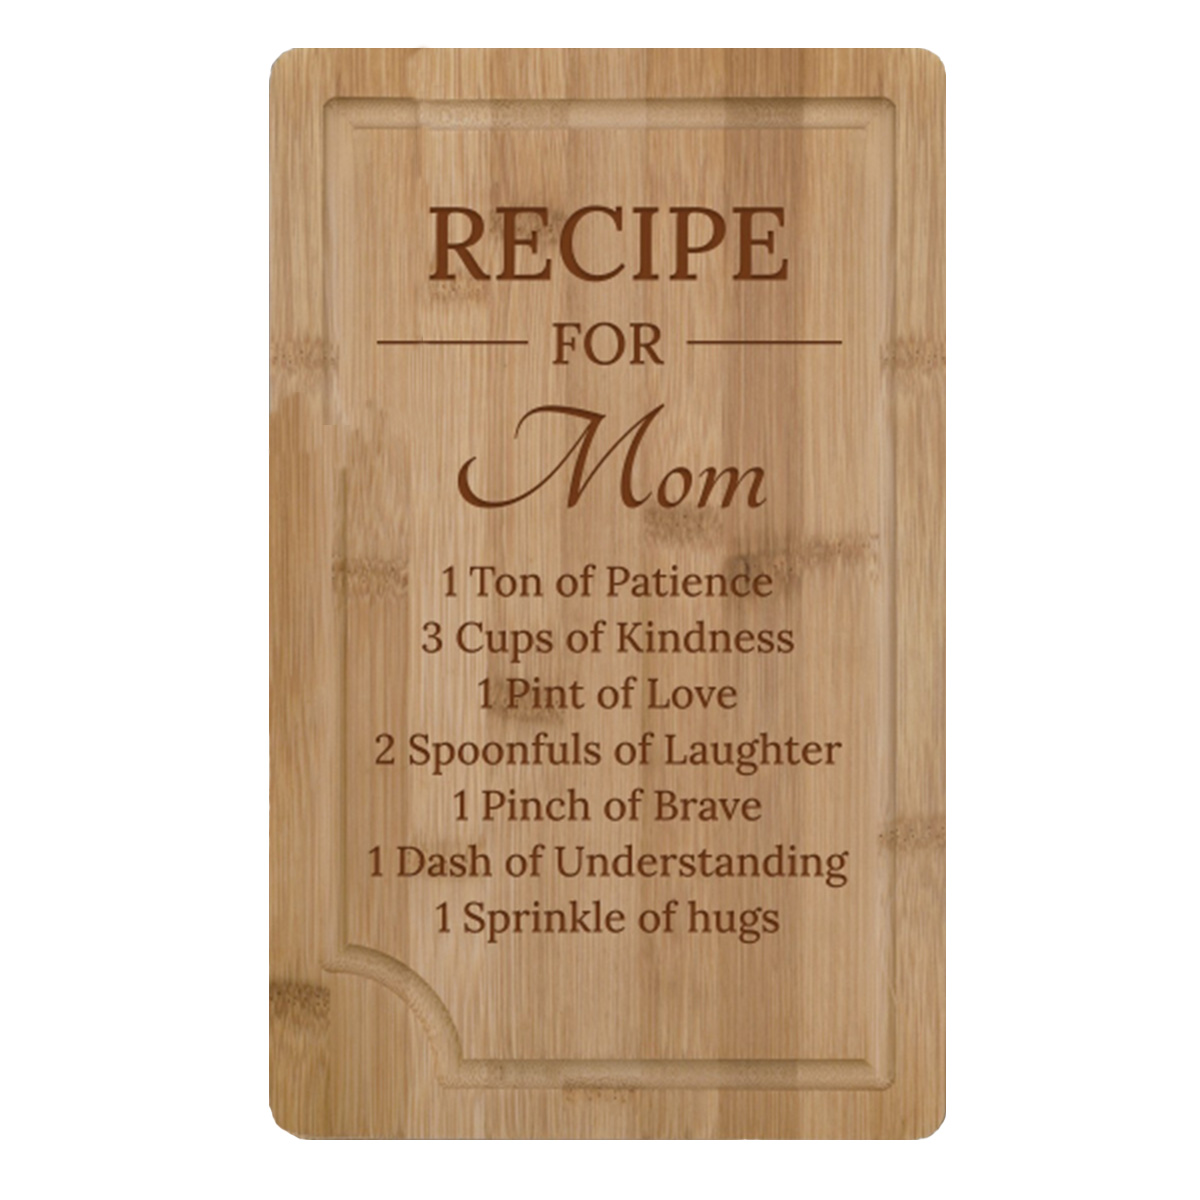 Sweet text engraved on a cutting board for Mother's Day.  A recipe for a mom includes the nicest of ingredients.